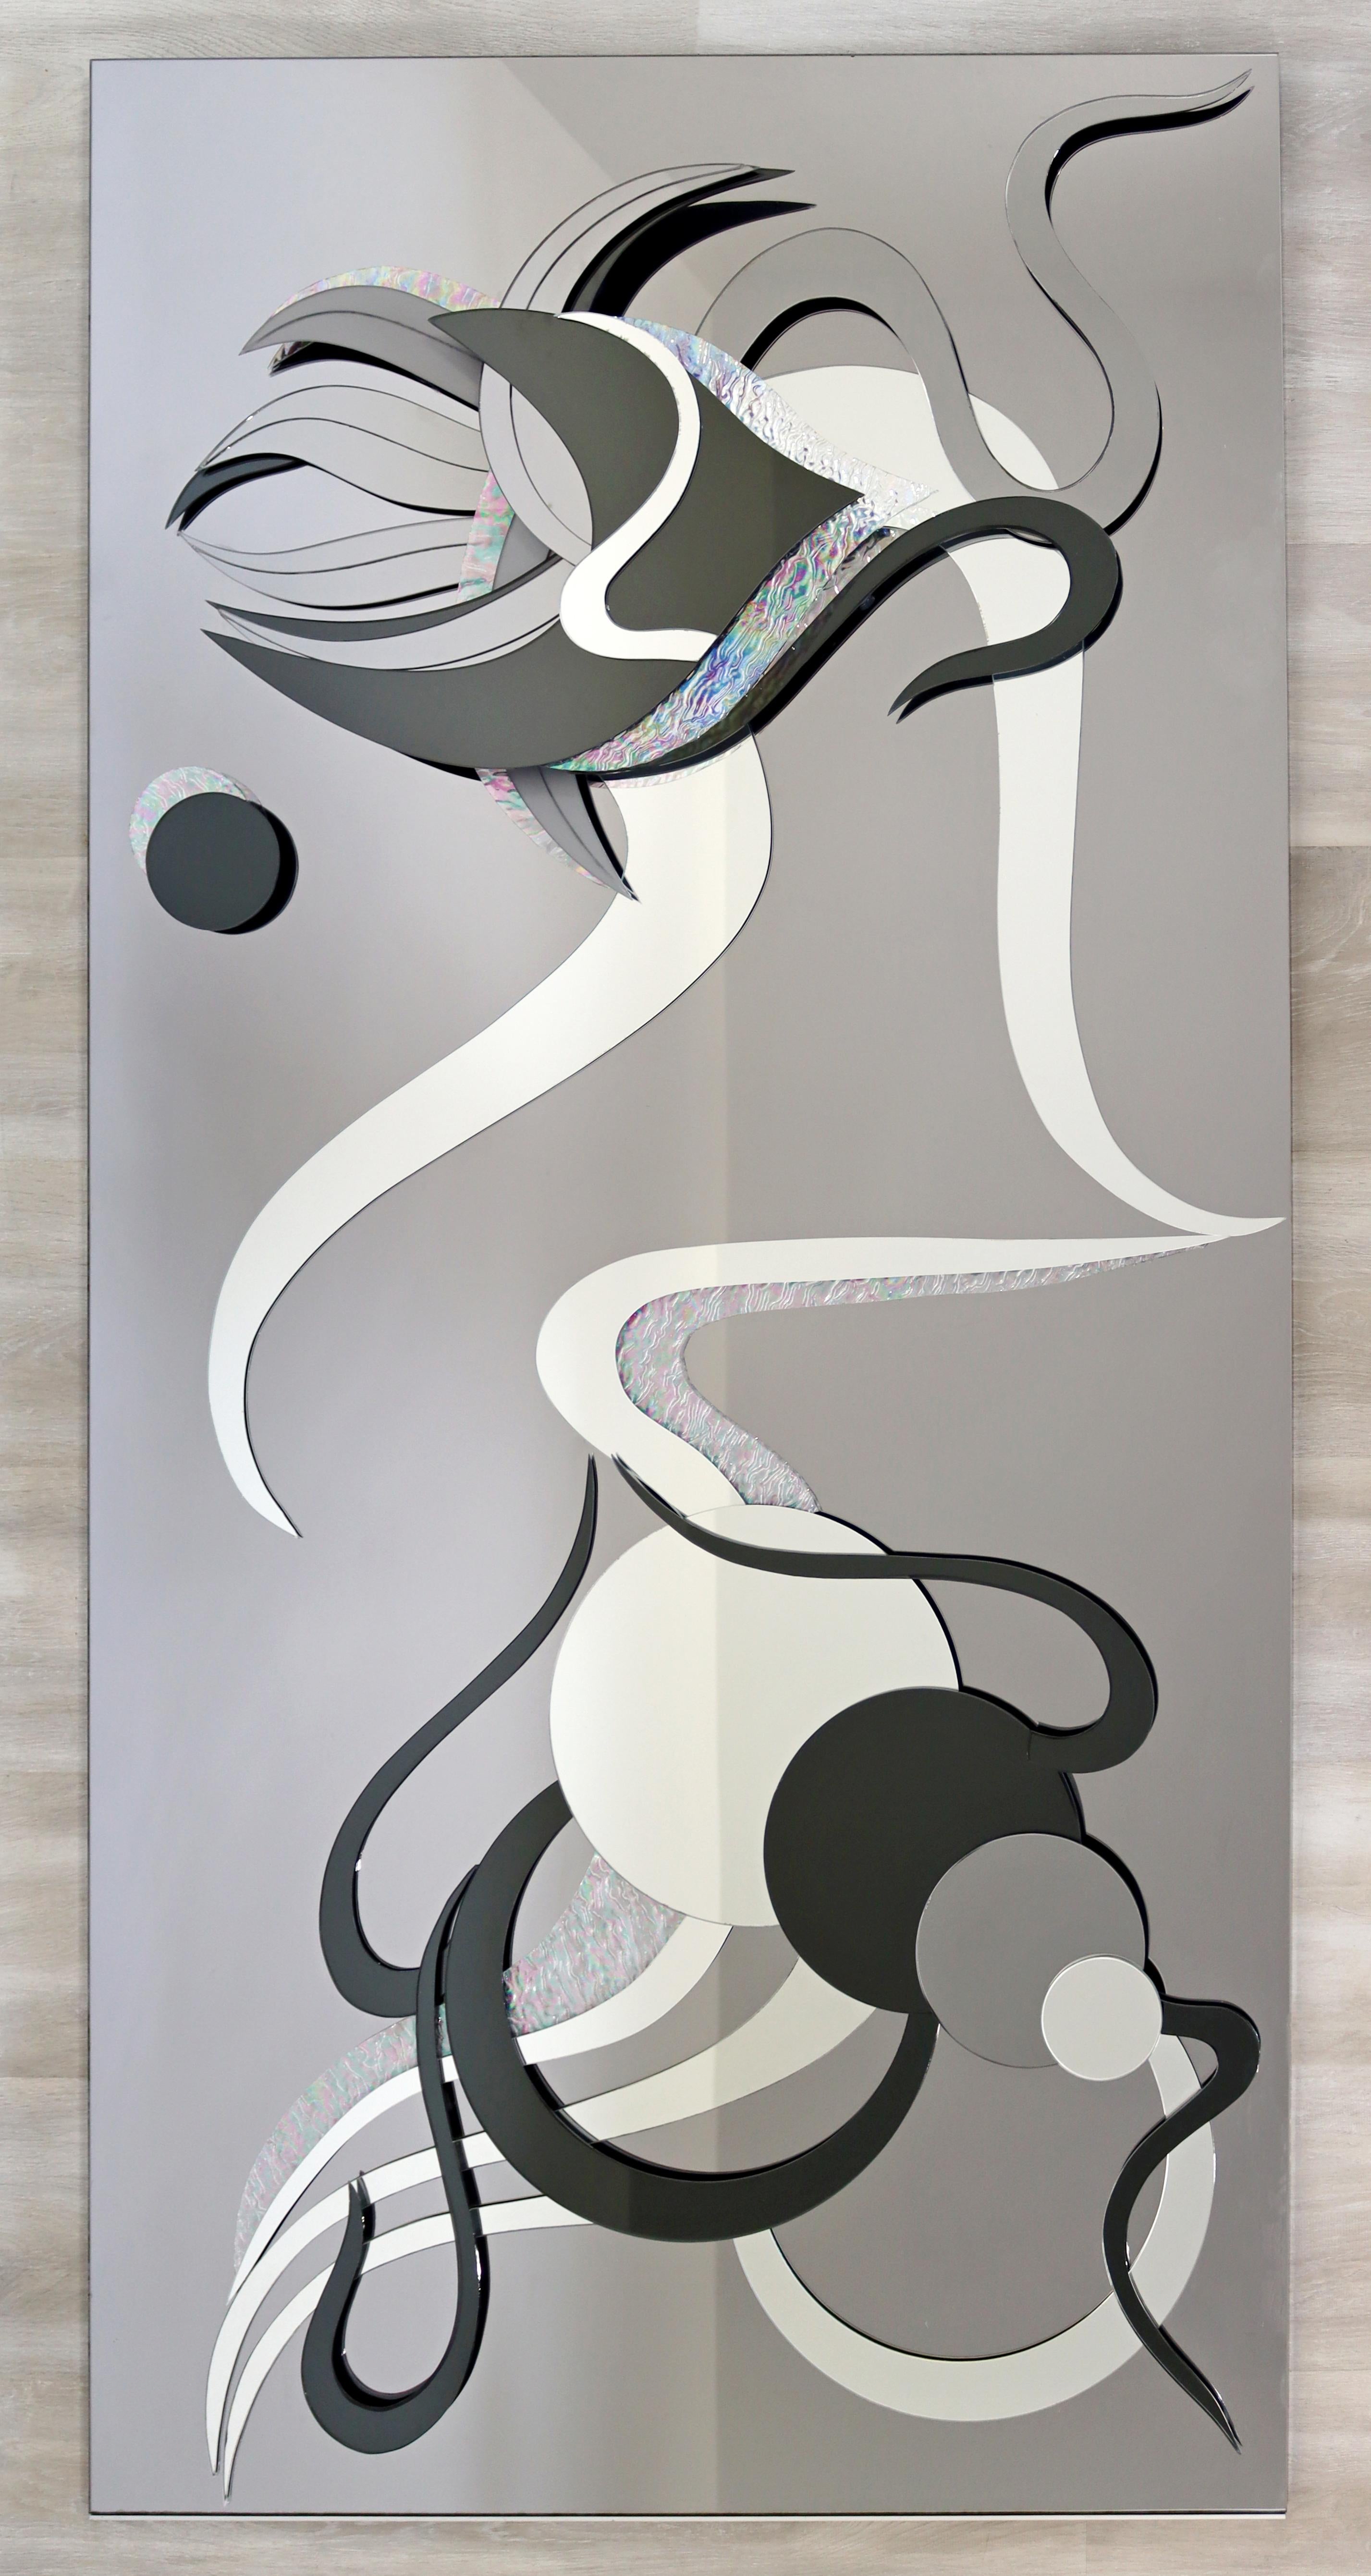 For your consideration is a fabulous, rectangular wall mirror, with an abstract art design, circa the 1980s. In excellent vintage condition. The dimensions are 30